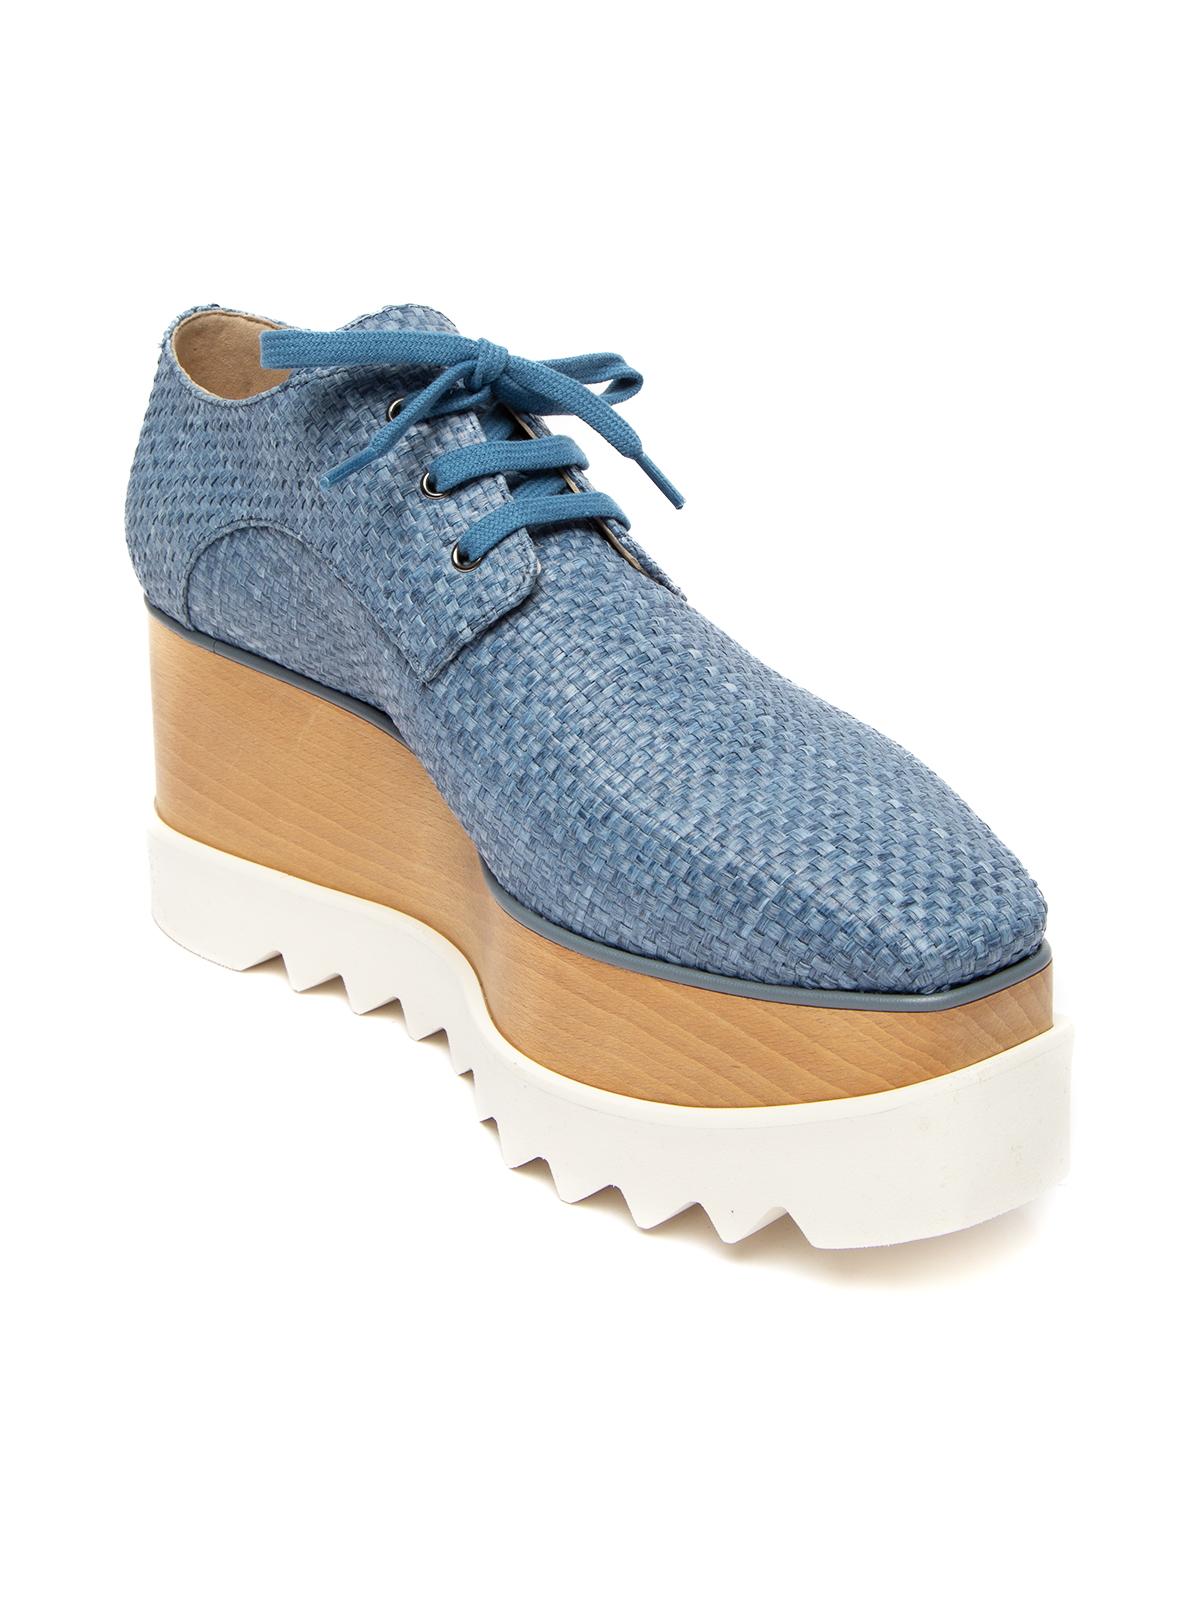 CONDITION is Never worn, with tag. No wear to sneakers is evident on this brand new Stella Mccartney designer resale item. Details Elyse Rafia Blue Wicker Platform Rectangle toe Lace up fastening Made in Italy Composition EXTERIOR:Wicker